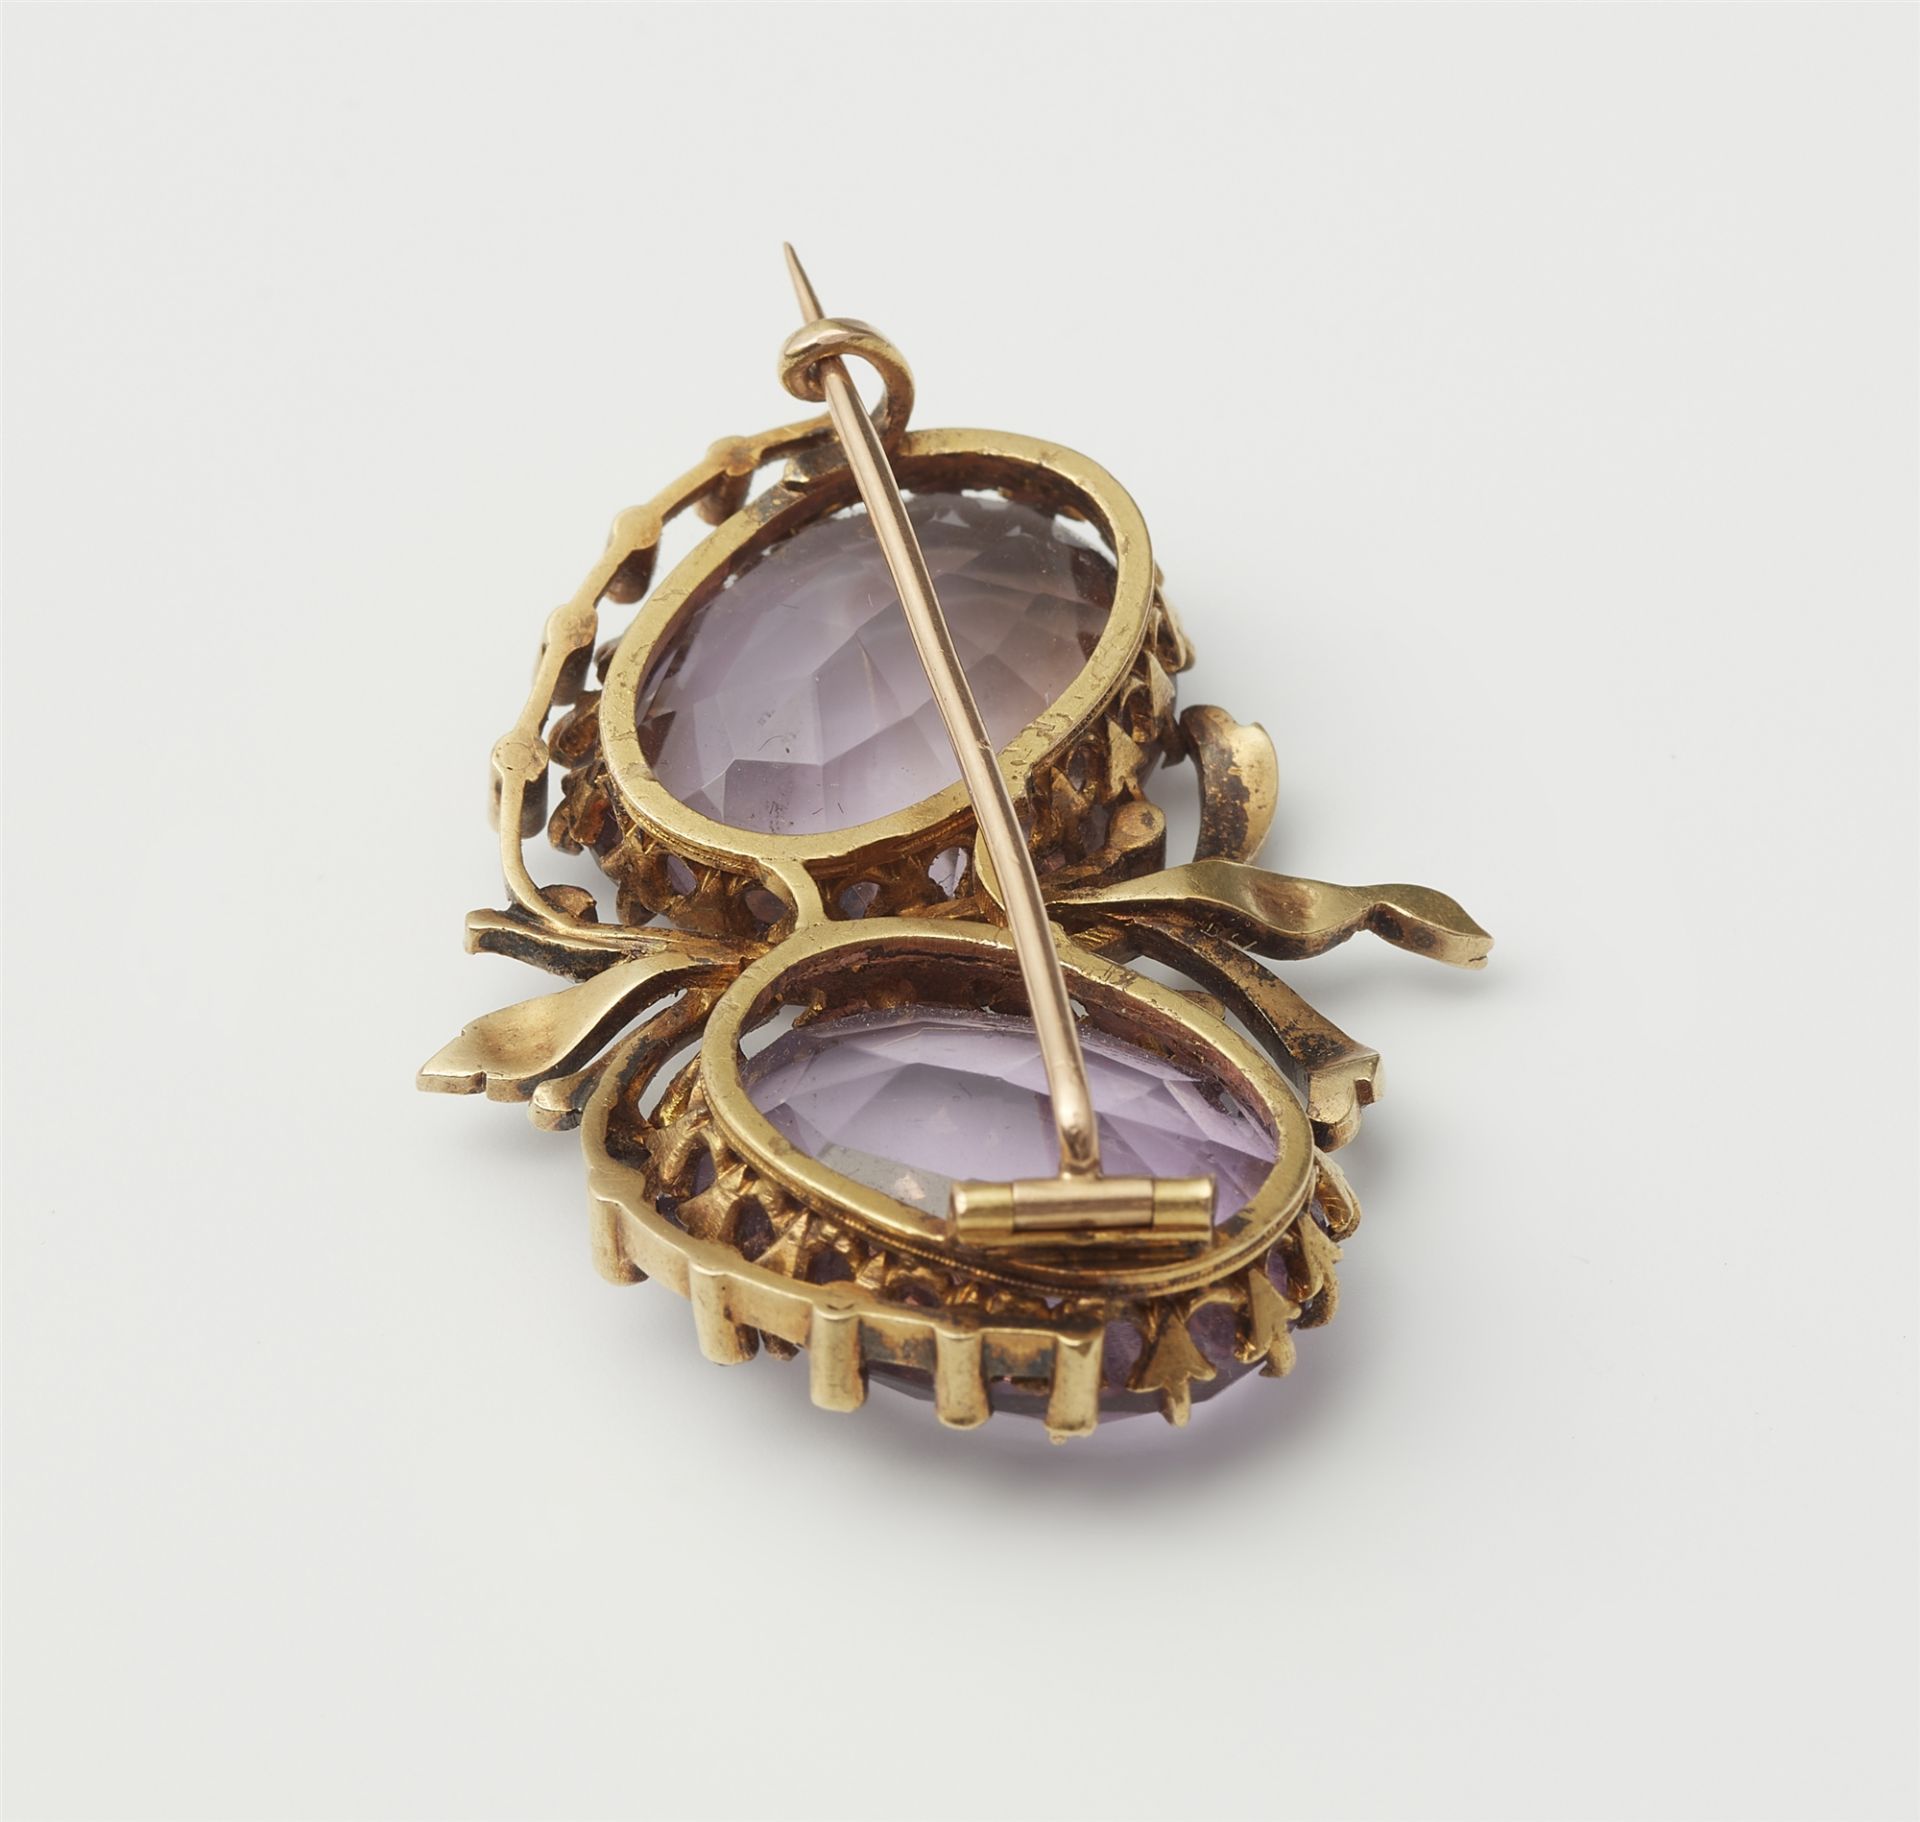 A late 19th century 14k gold, diamond and amethyst brooch. - Image 2 of 2